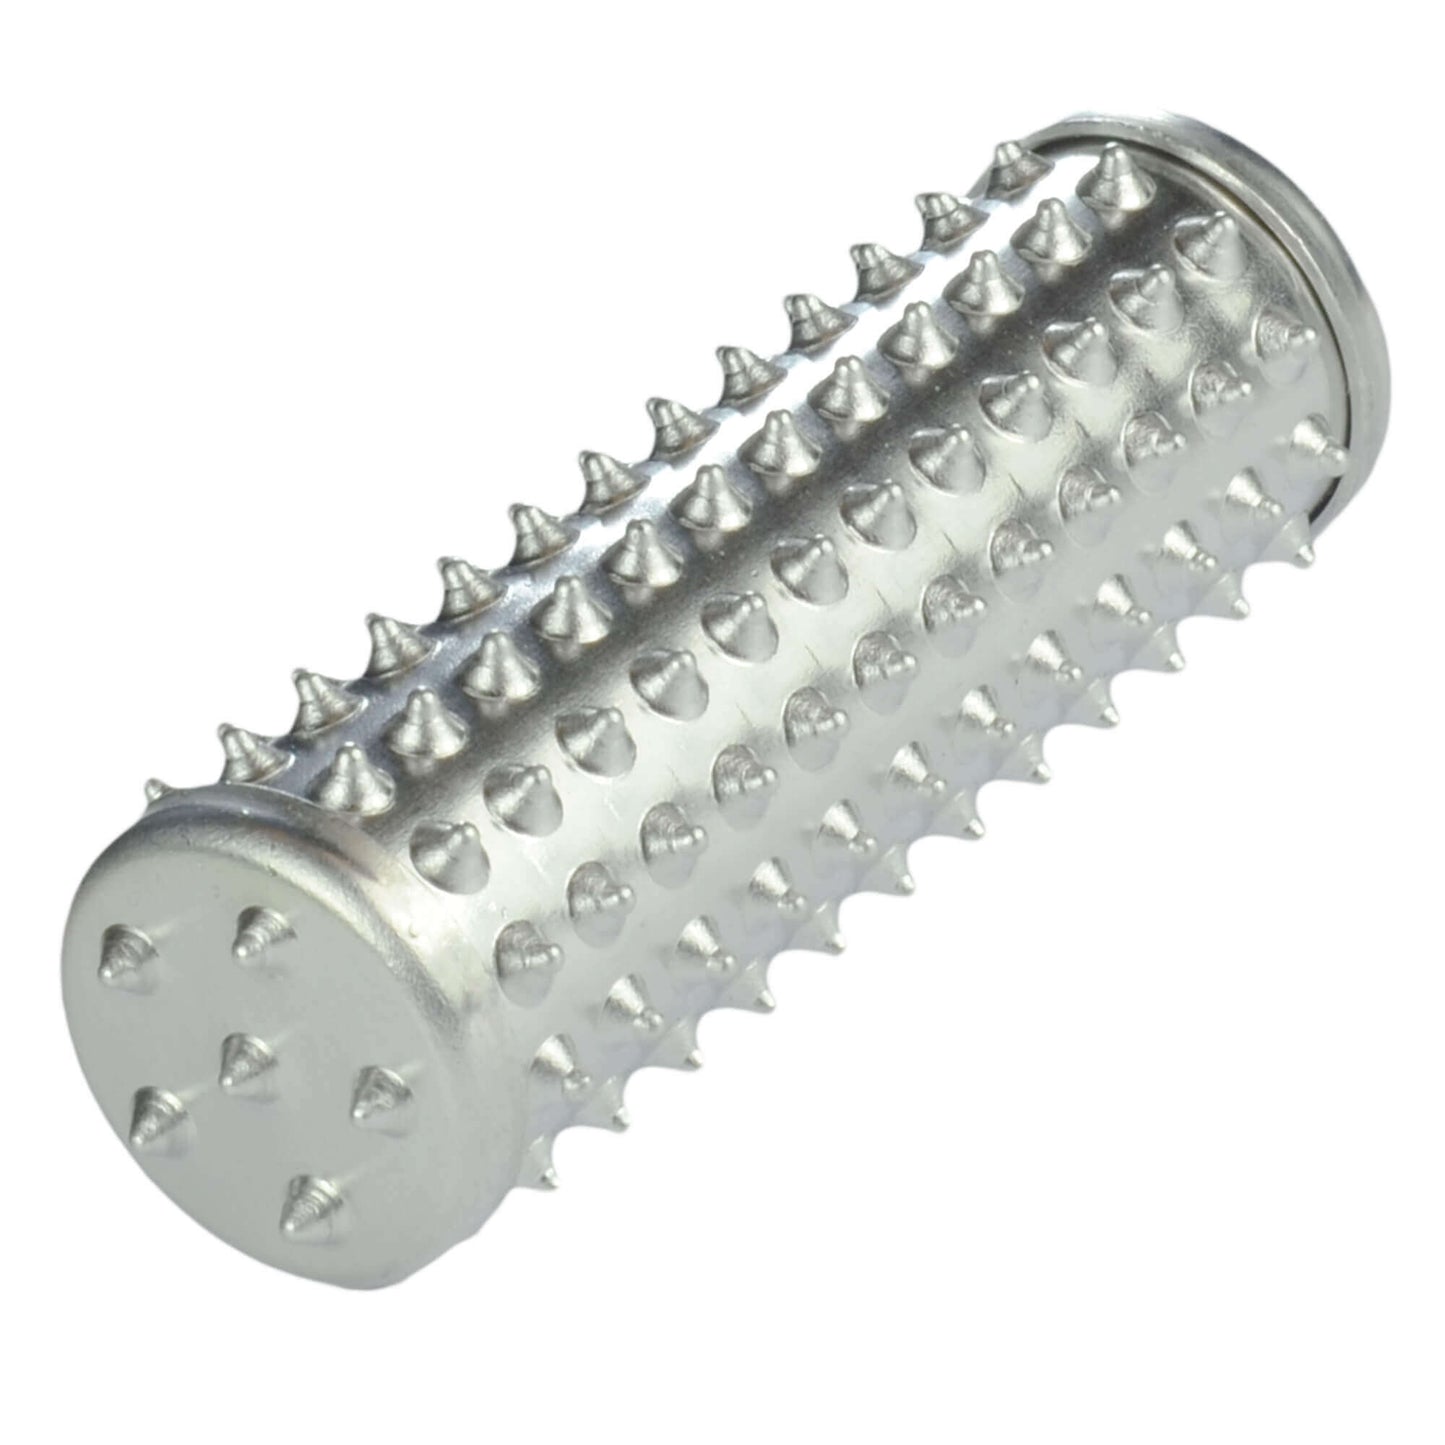 Massage roller with cone tips